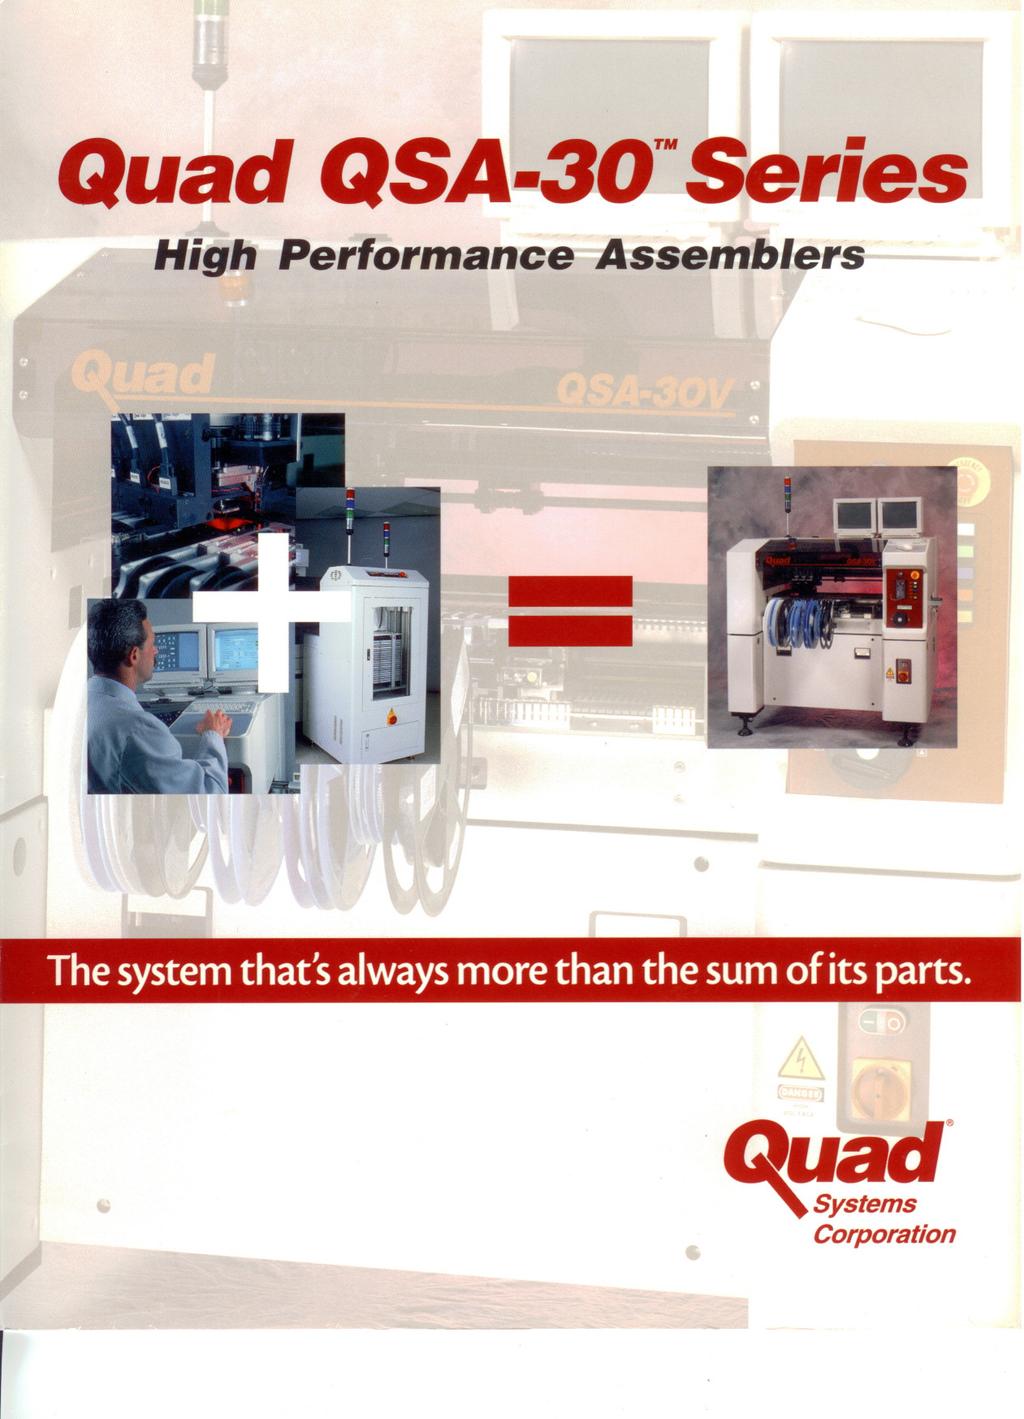 Quad QSA 30 Series High Performance Assemblers The system